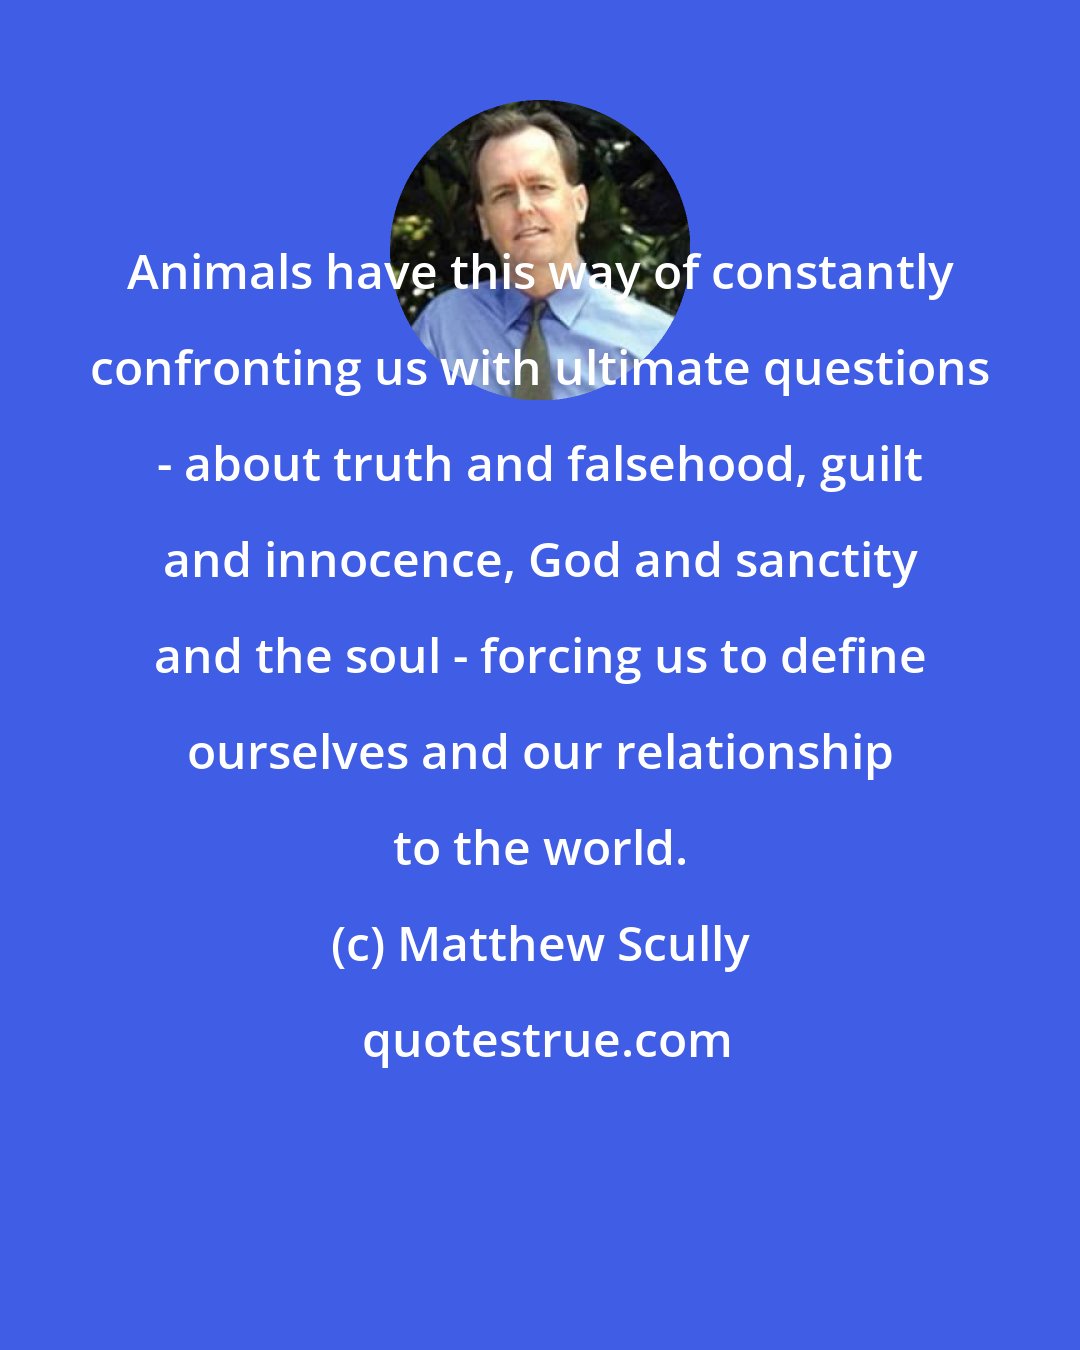 Matthew Scully: Animals have this way of constantly confronting us with ultimate questions - about truth and falsehood, guilt and innocence, God and sanctity and the soul - forcing us to define ourselves and our relationship to the world.